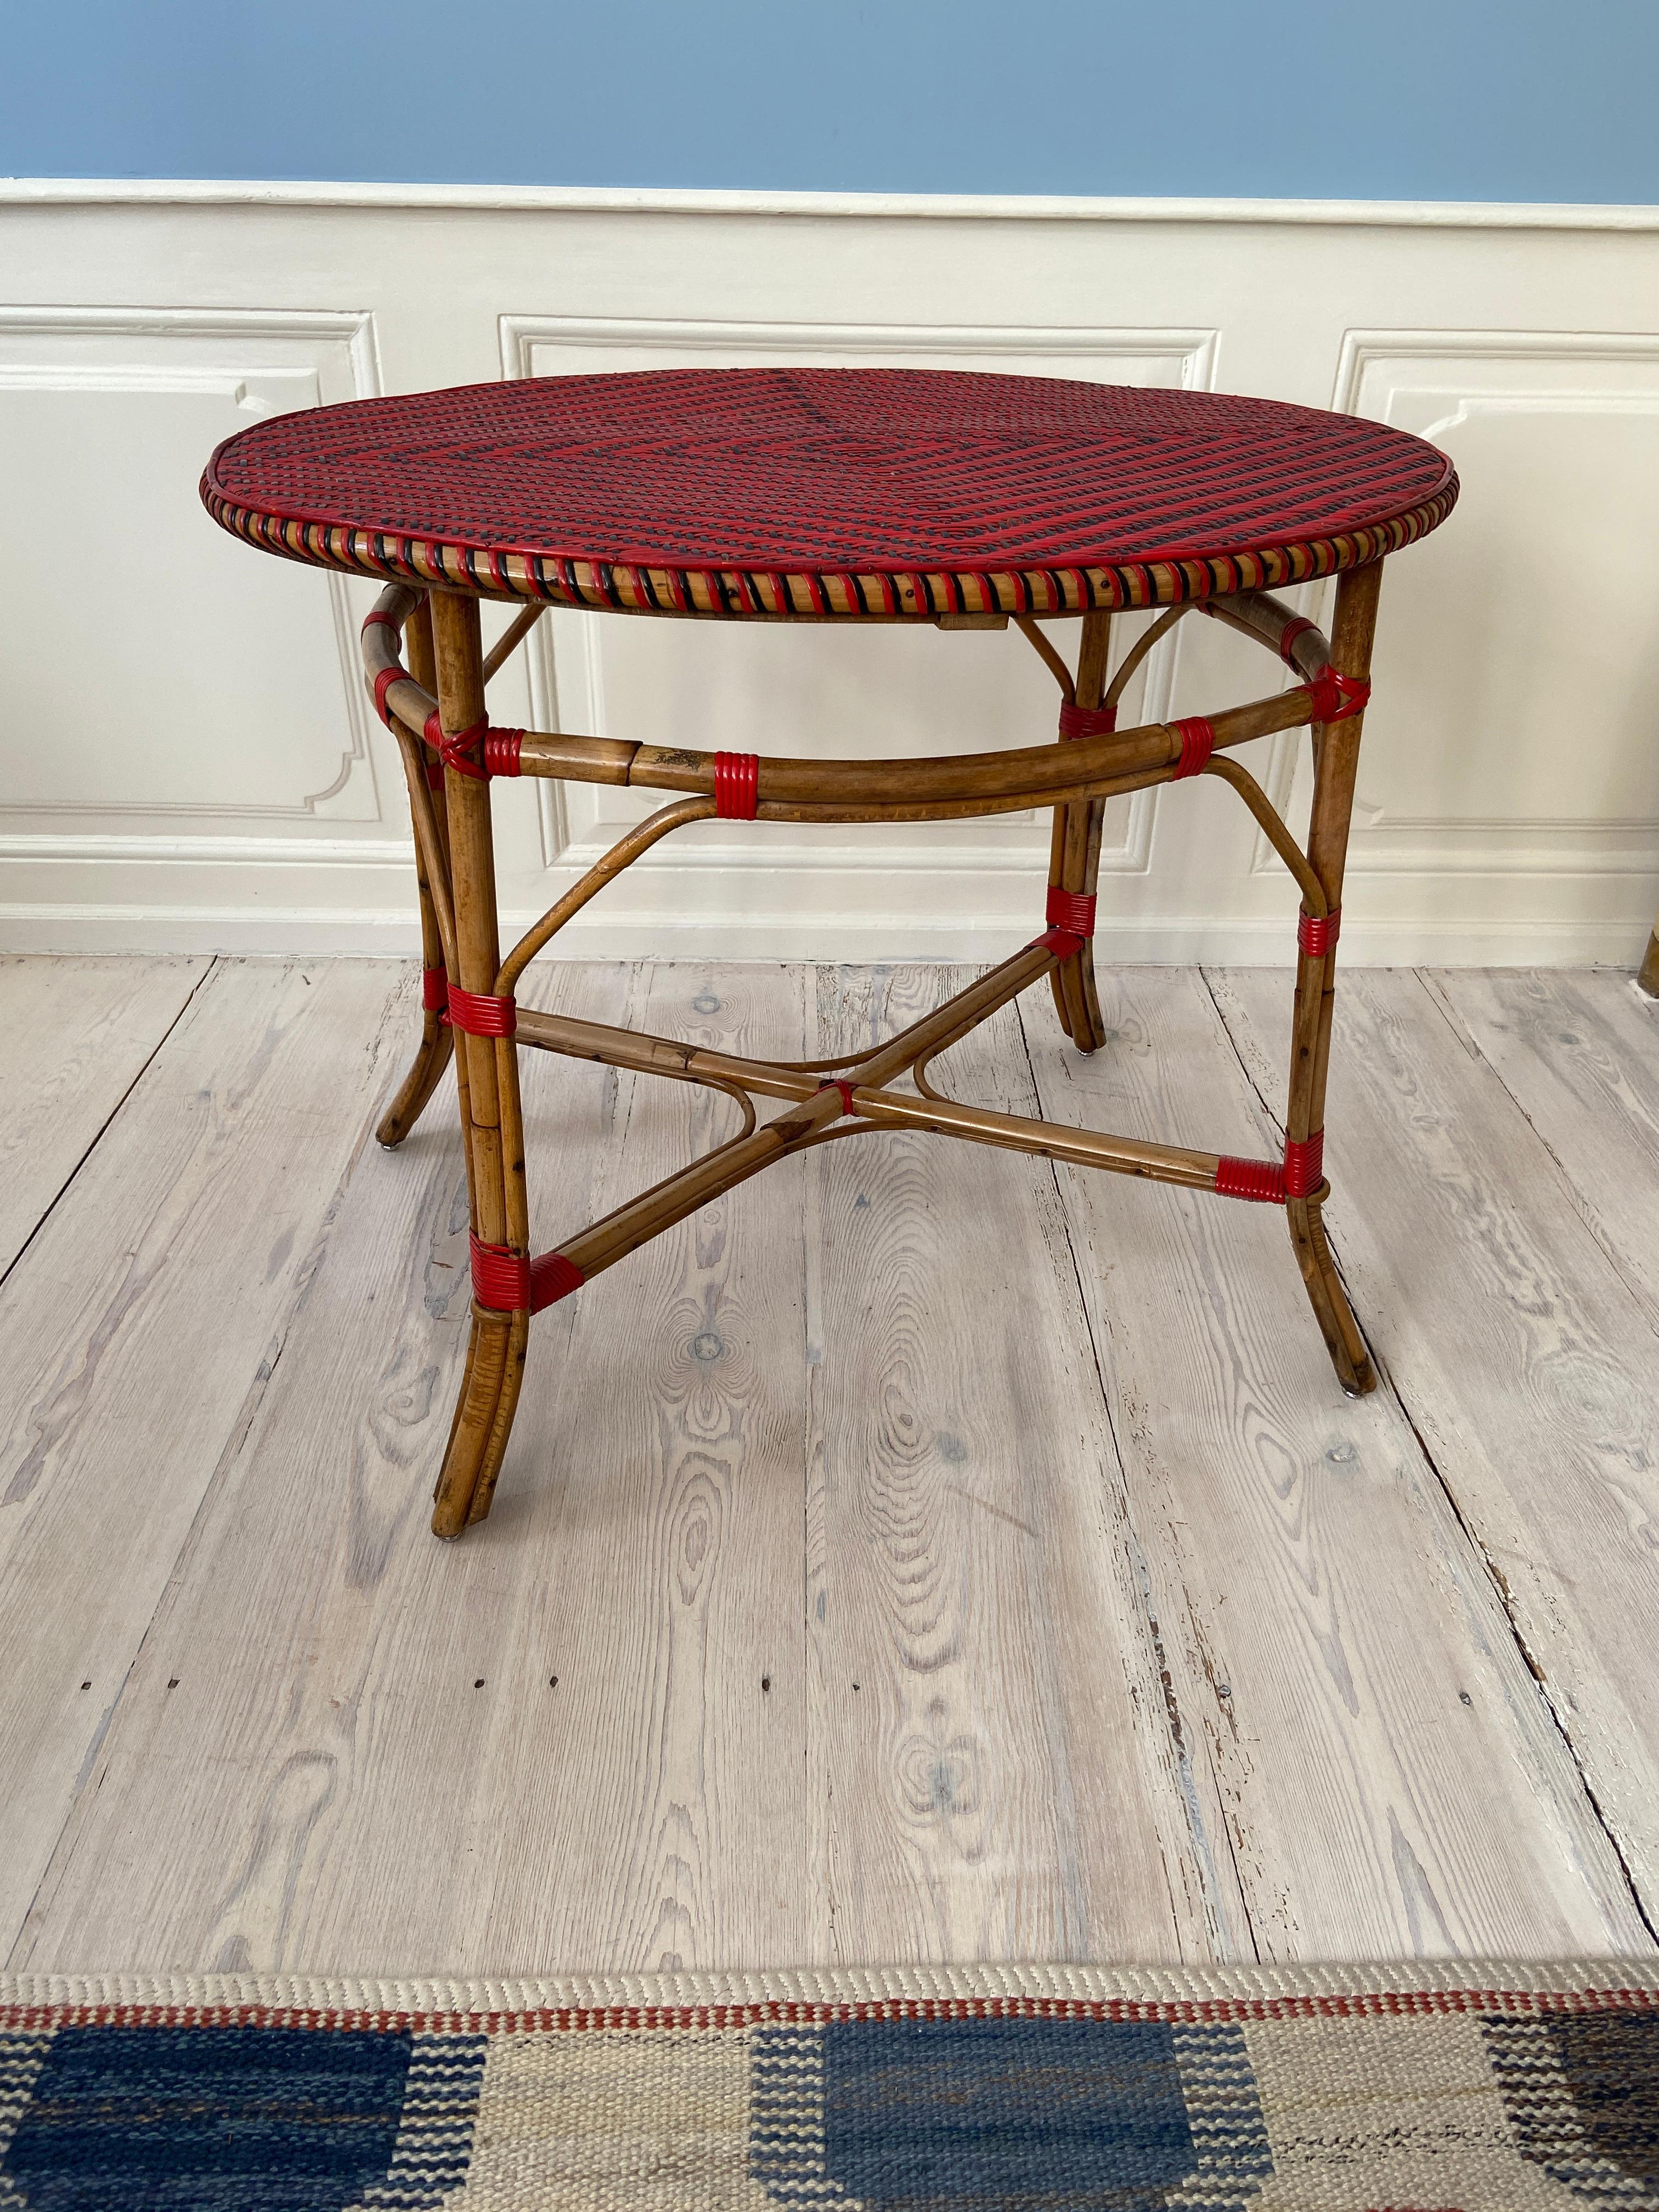 French Vintage Rattan Table with Elegant Red Woven Details, France, Early 20th-Century